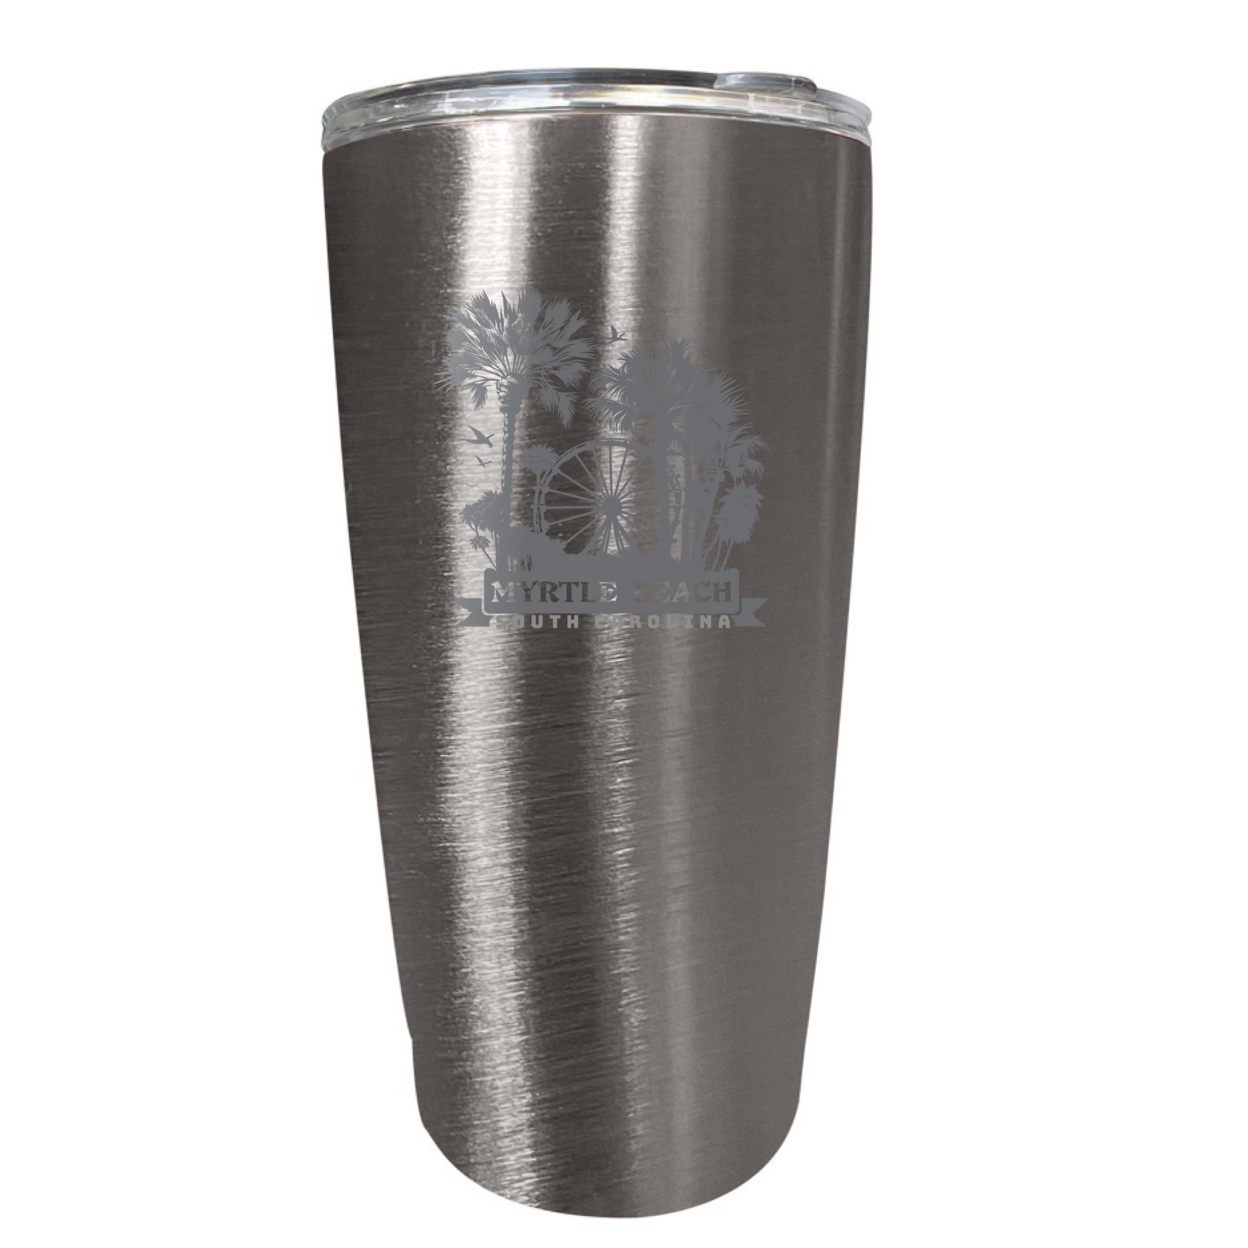 Myrtle Beach South Carolina Laser Etched Souvenir 16 Oz Stainless Steel Insulated Tumbler - Steel